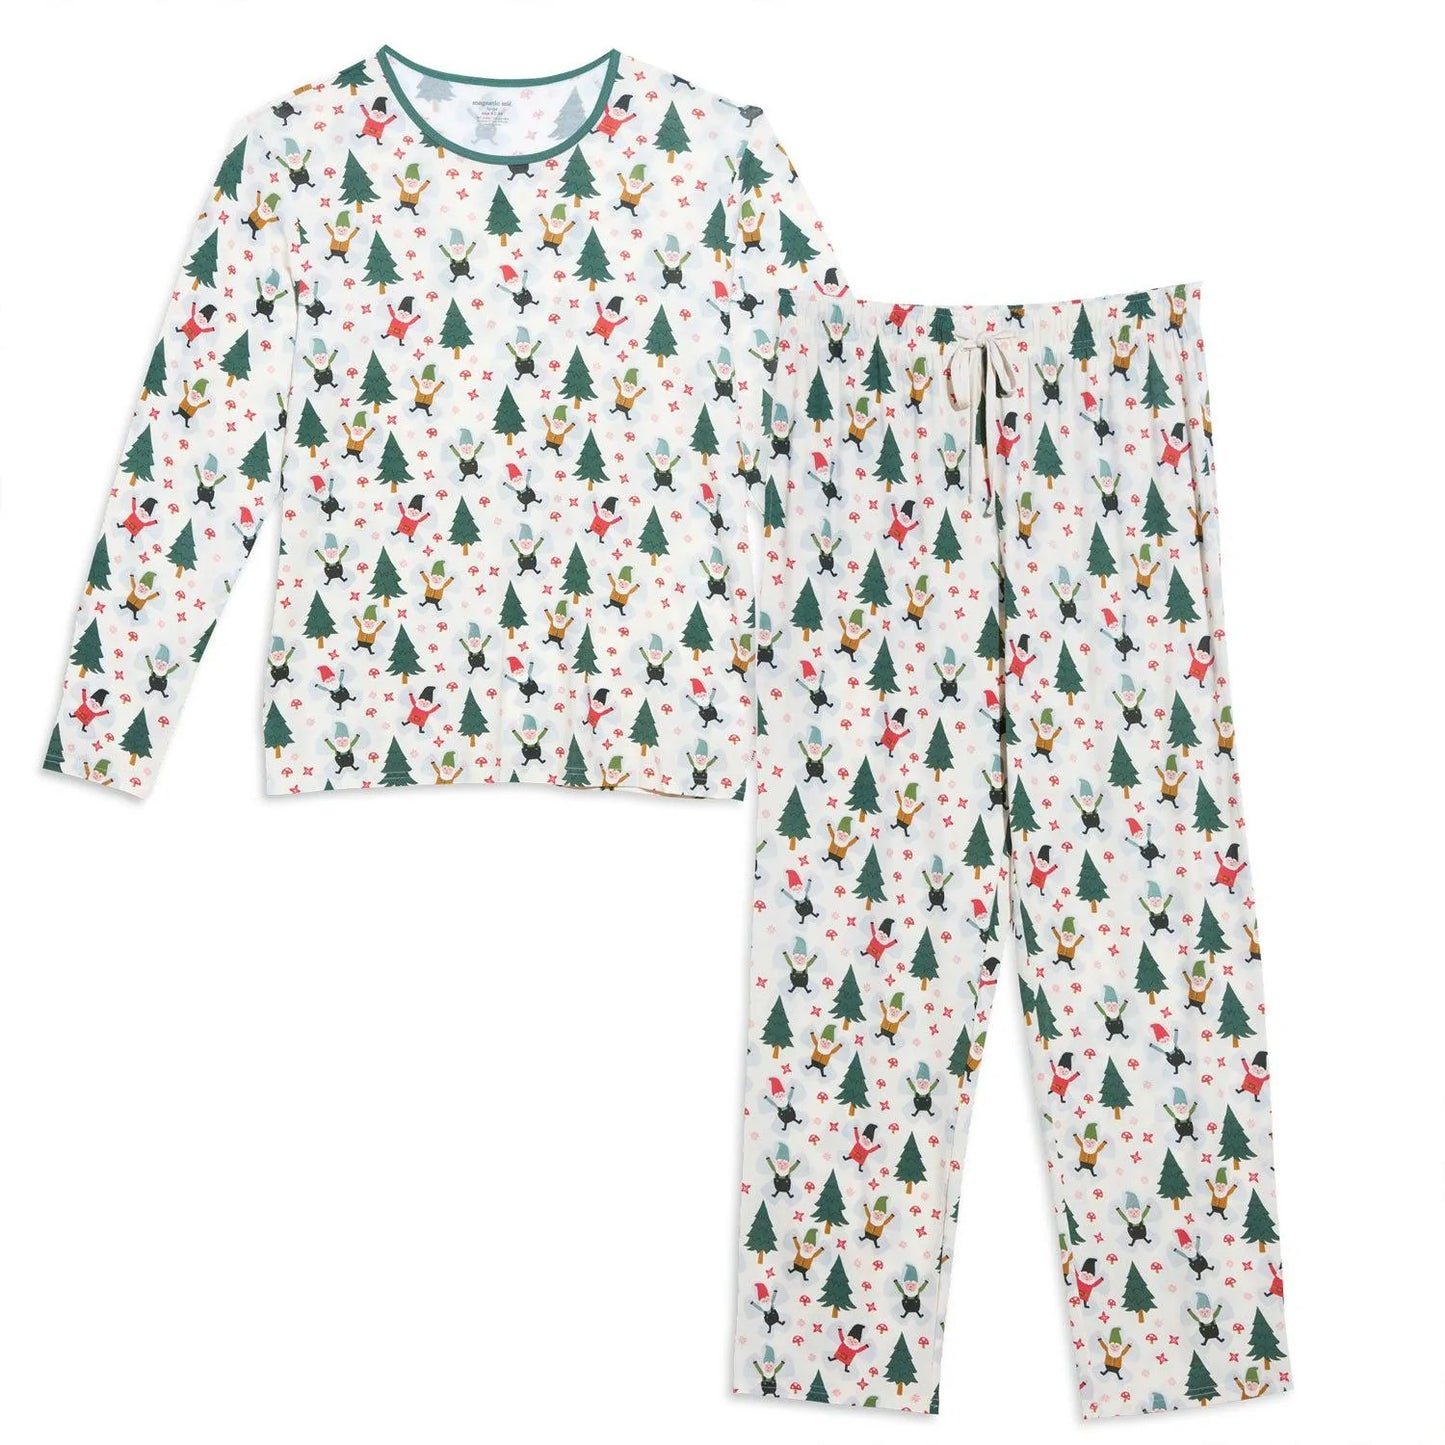 Men's Modal PJs - Gnome For the Holidays